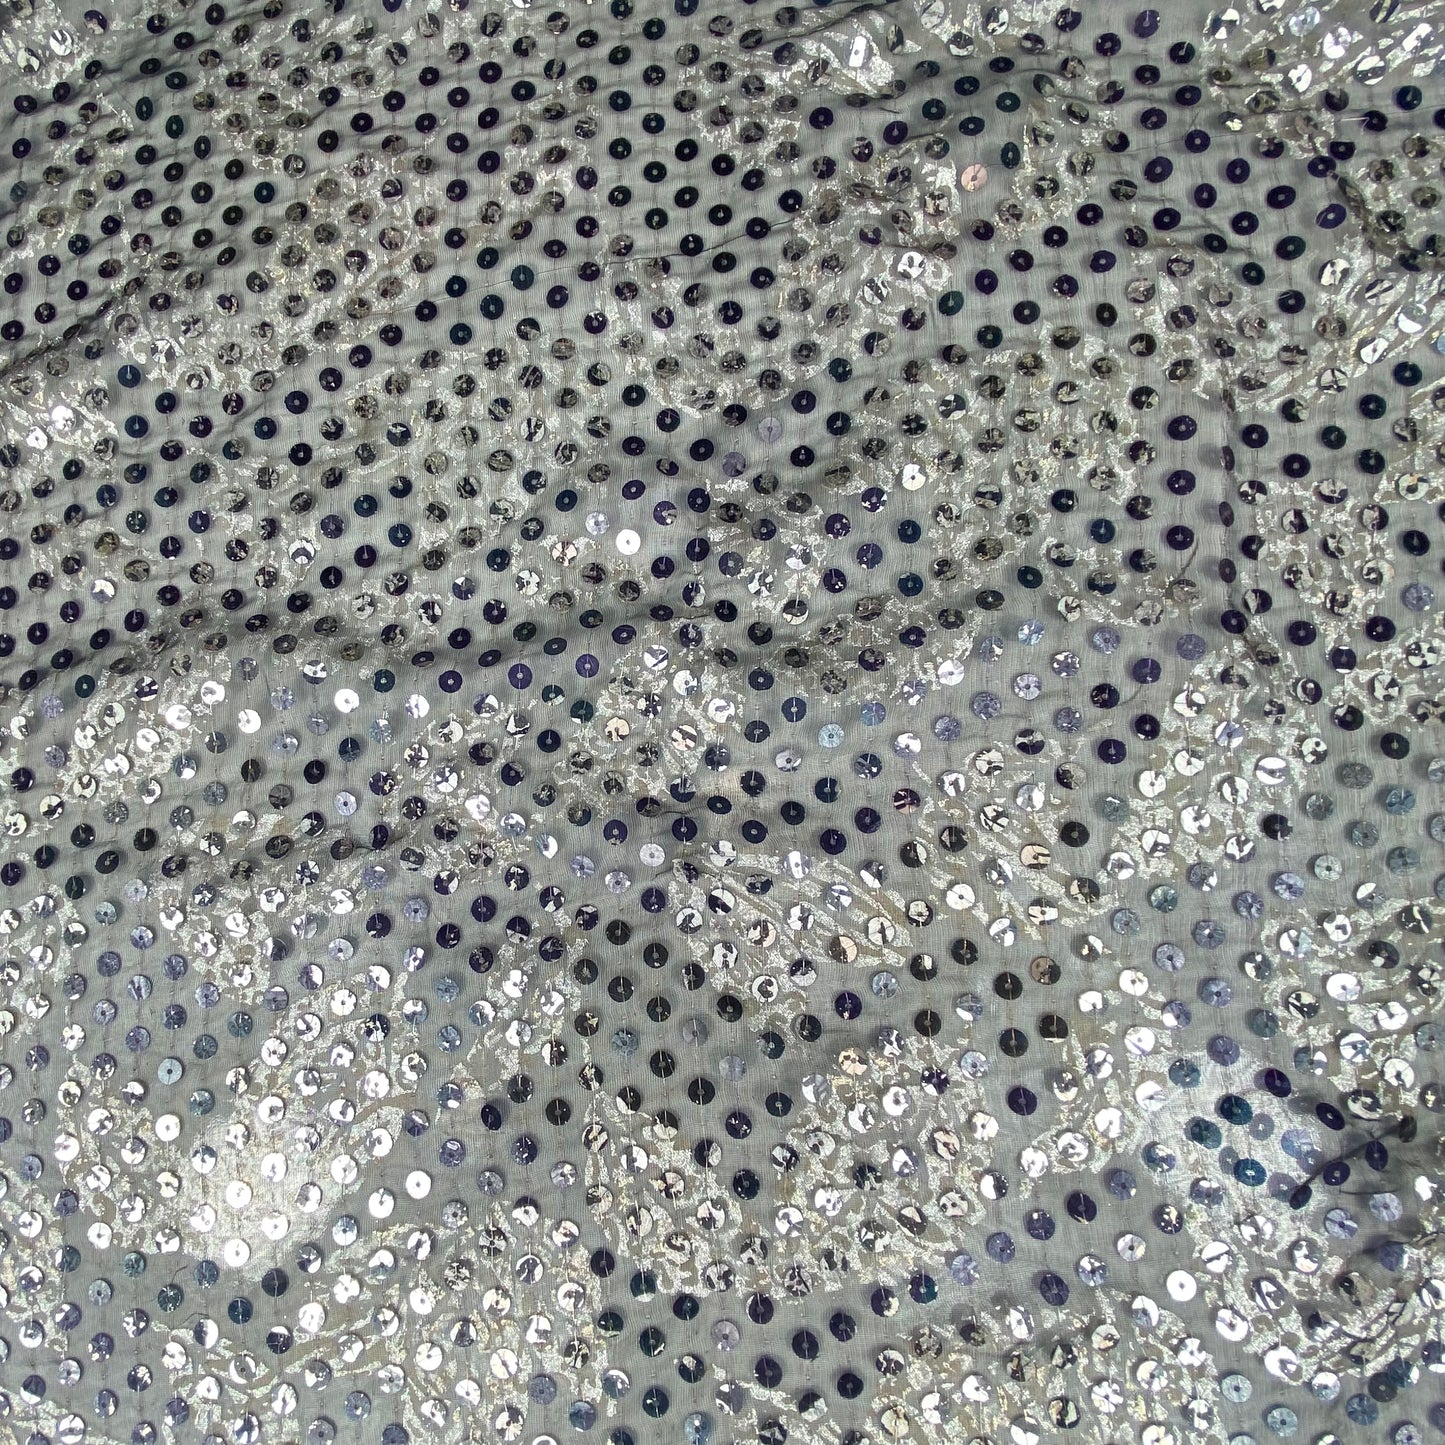 Sequin Printed Embriodered Chiffon - Black/Silver